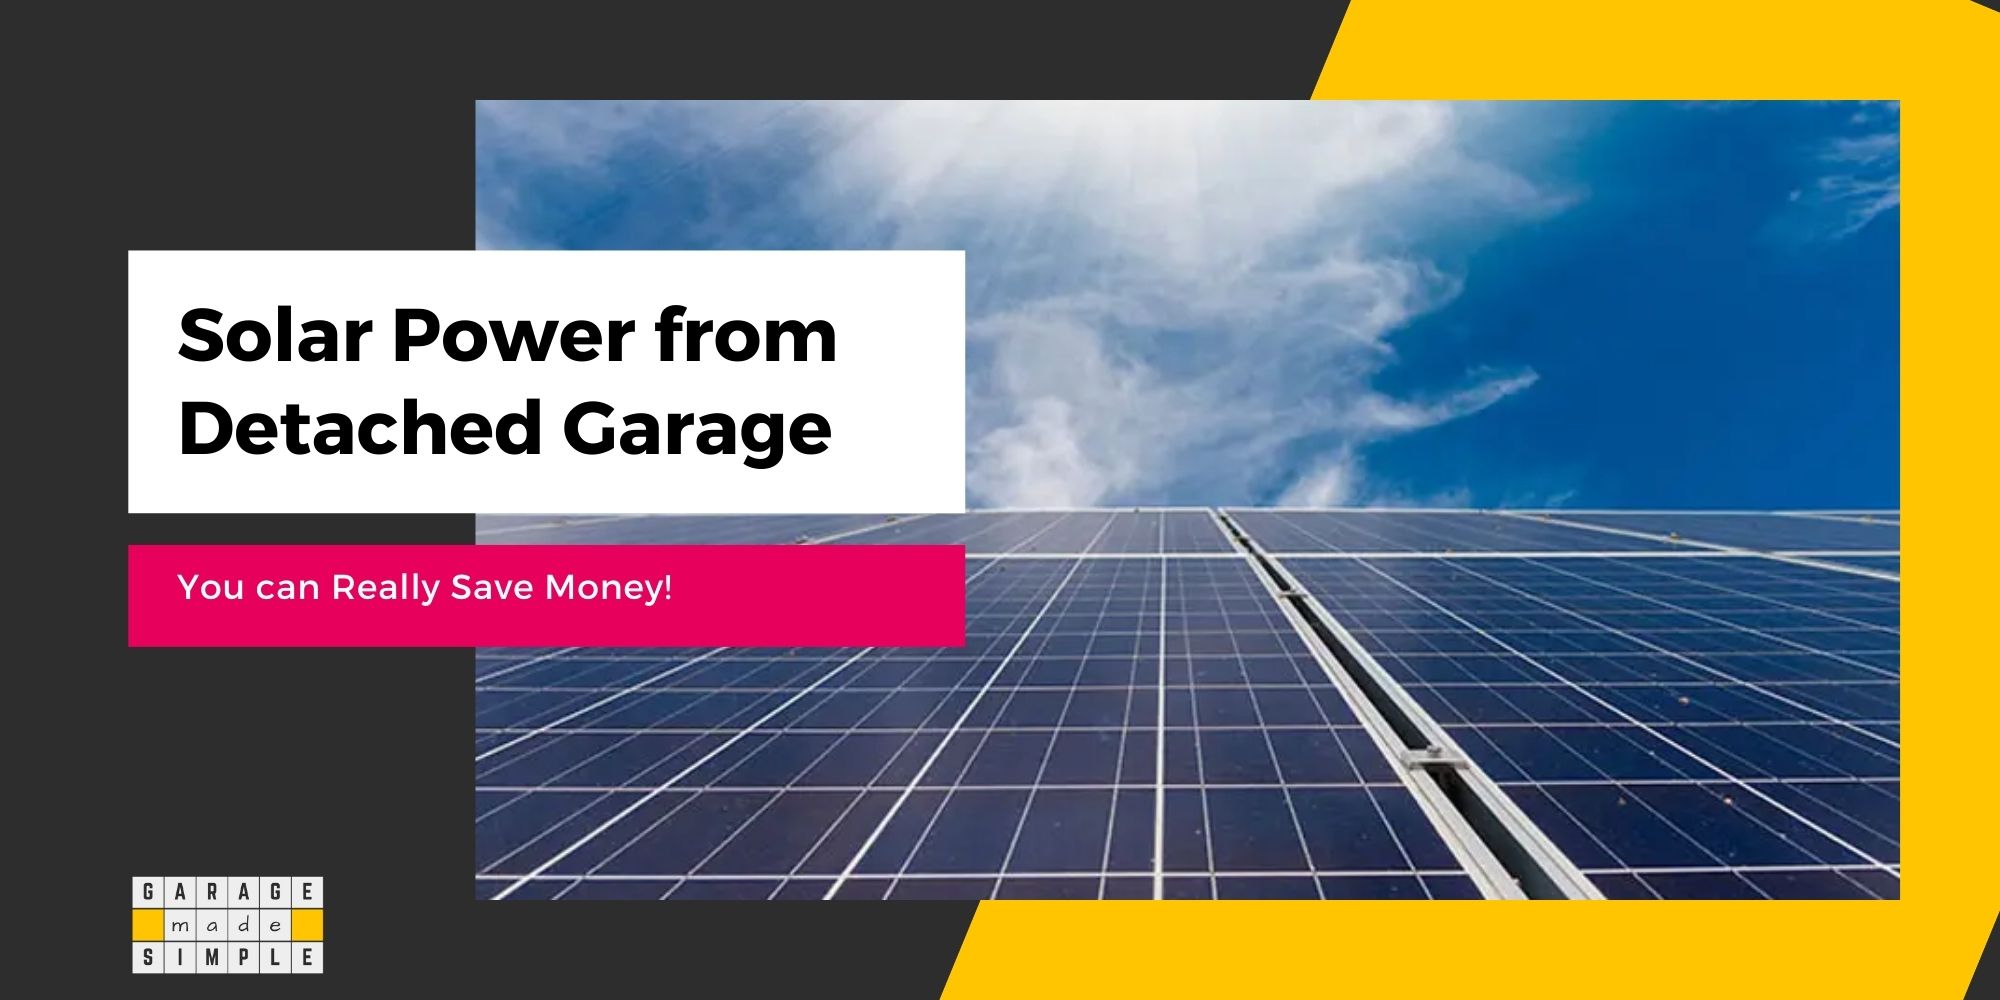 Will Solar Power From Detached Garage Really Save Money?